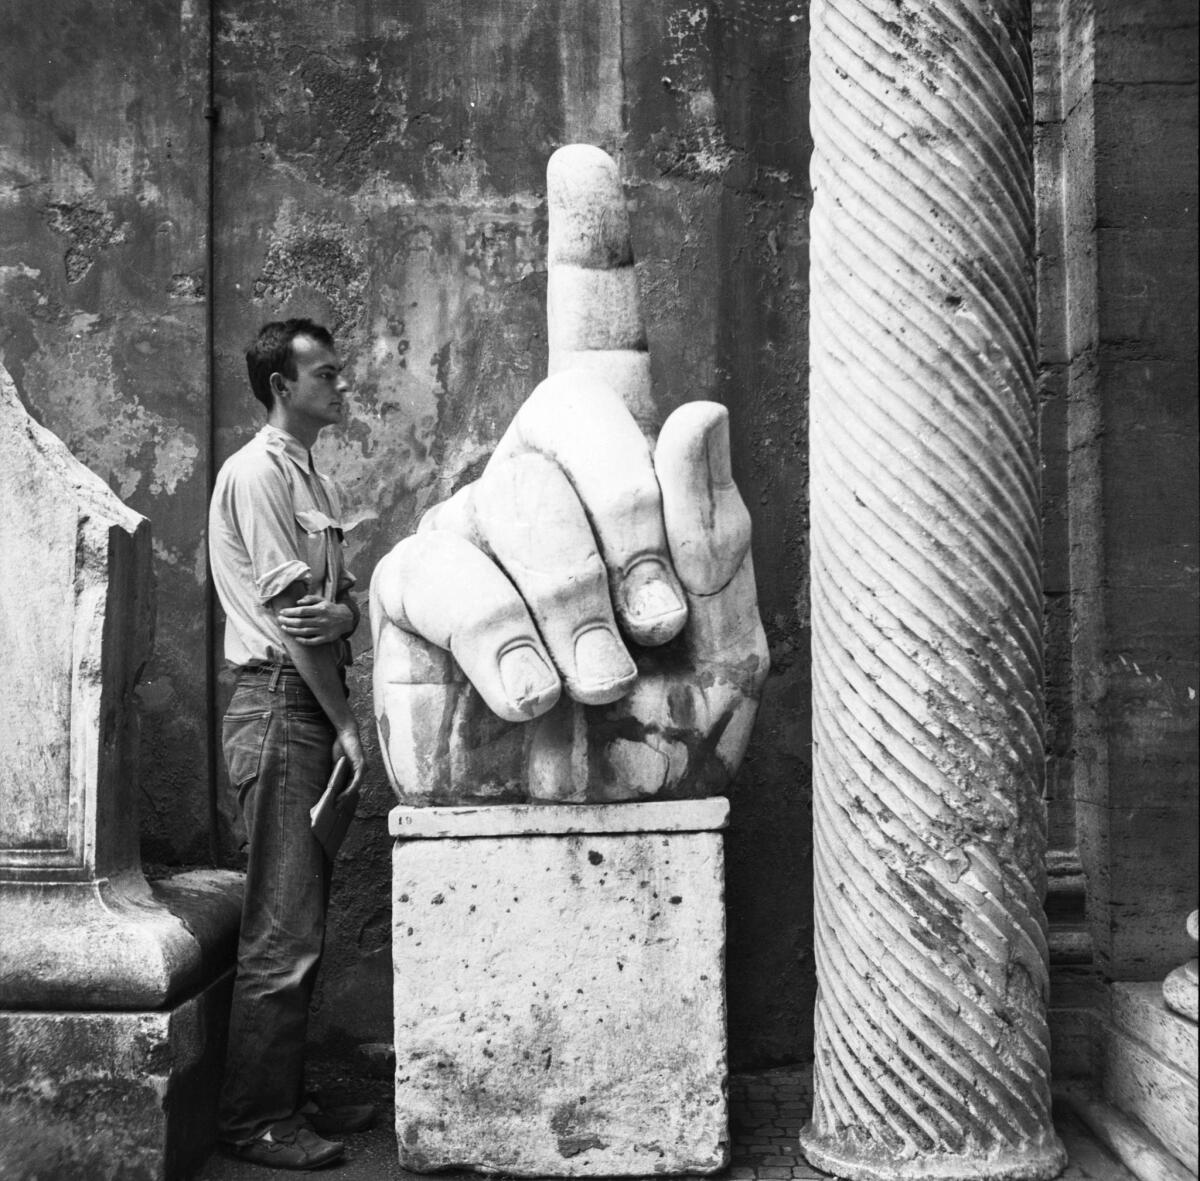 "Cy + Relics, Rome," 1952, printed 1980s. (Robert Rauschenberg Foundation)